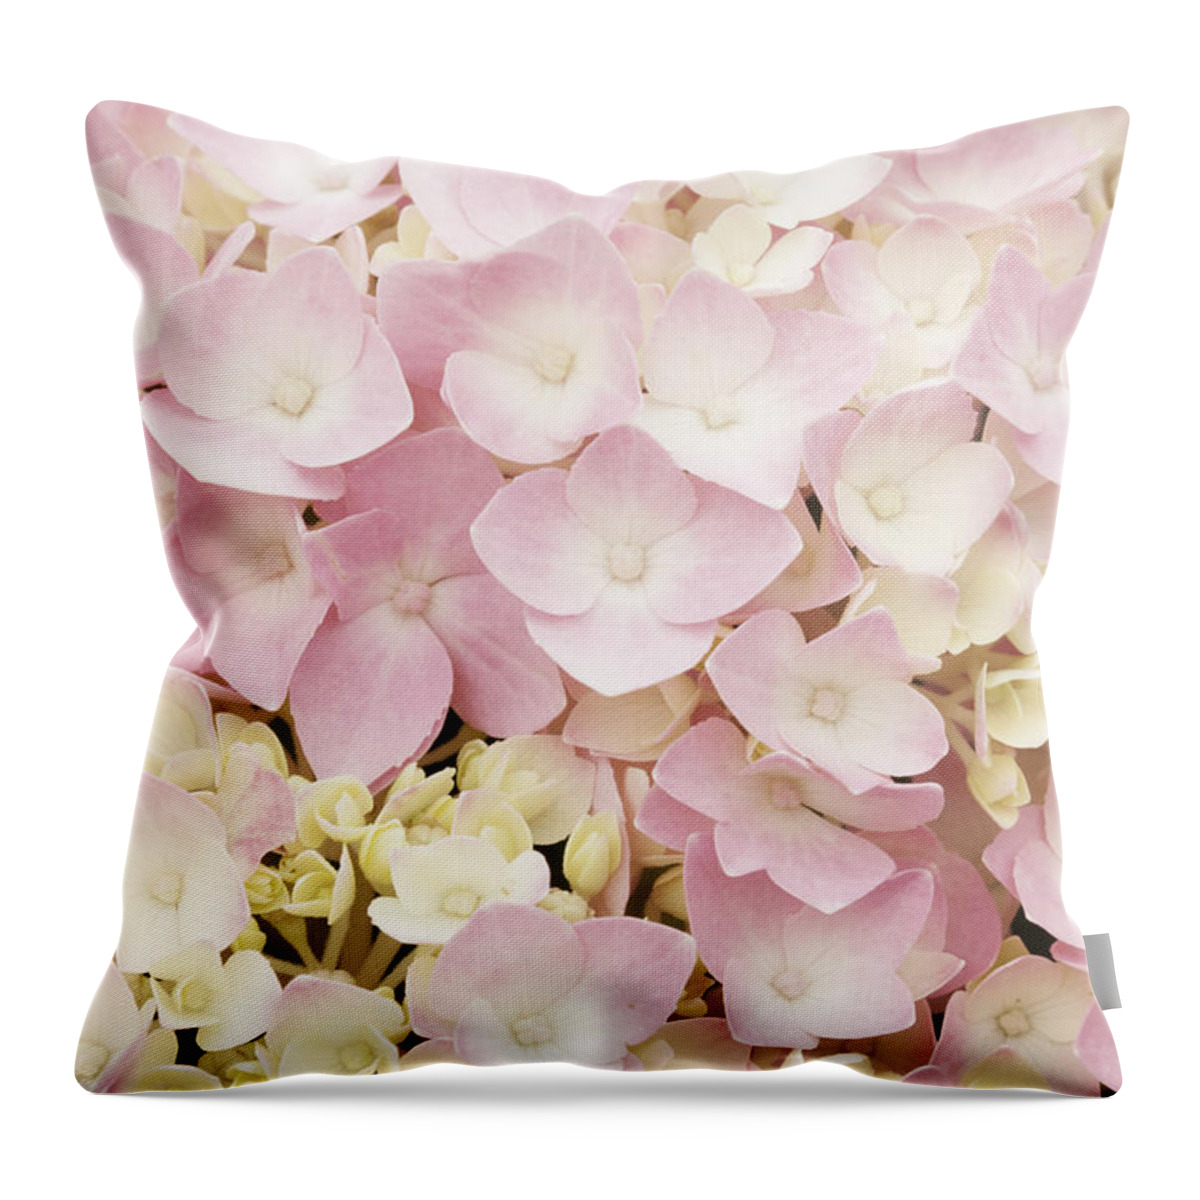 Girly Girl Throw Pillow featuring the photograph Girly Girl by Patty Colabuono